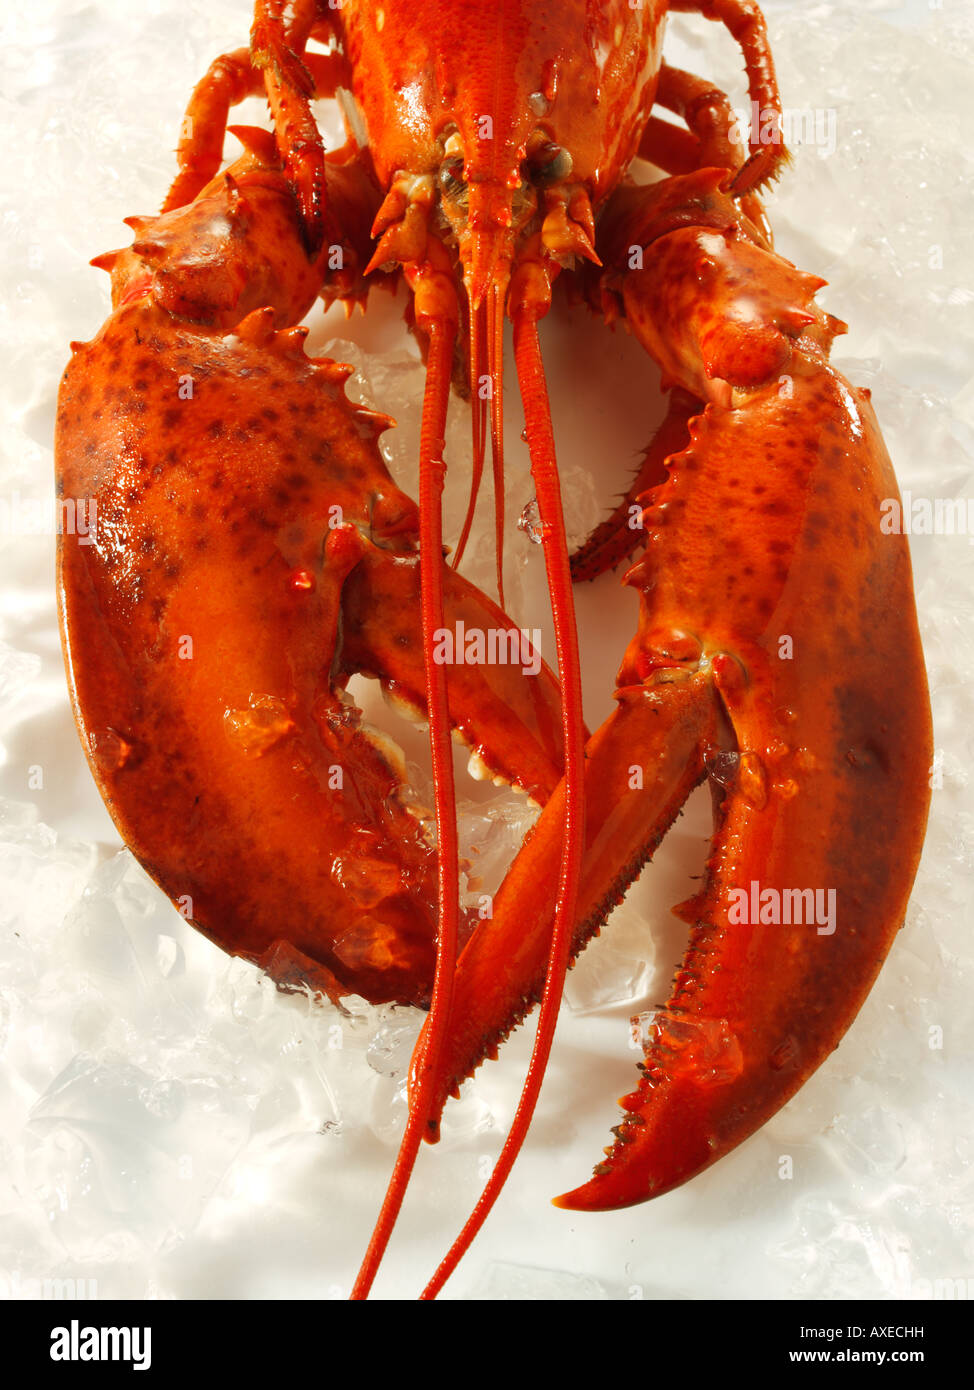 Fresh lobster in its shell on crushed ice Stock Photo